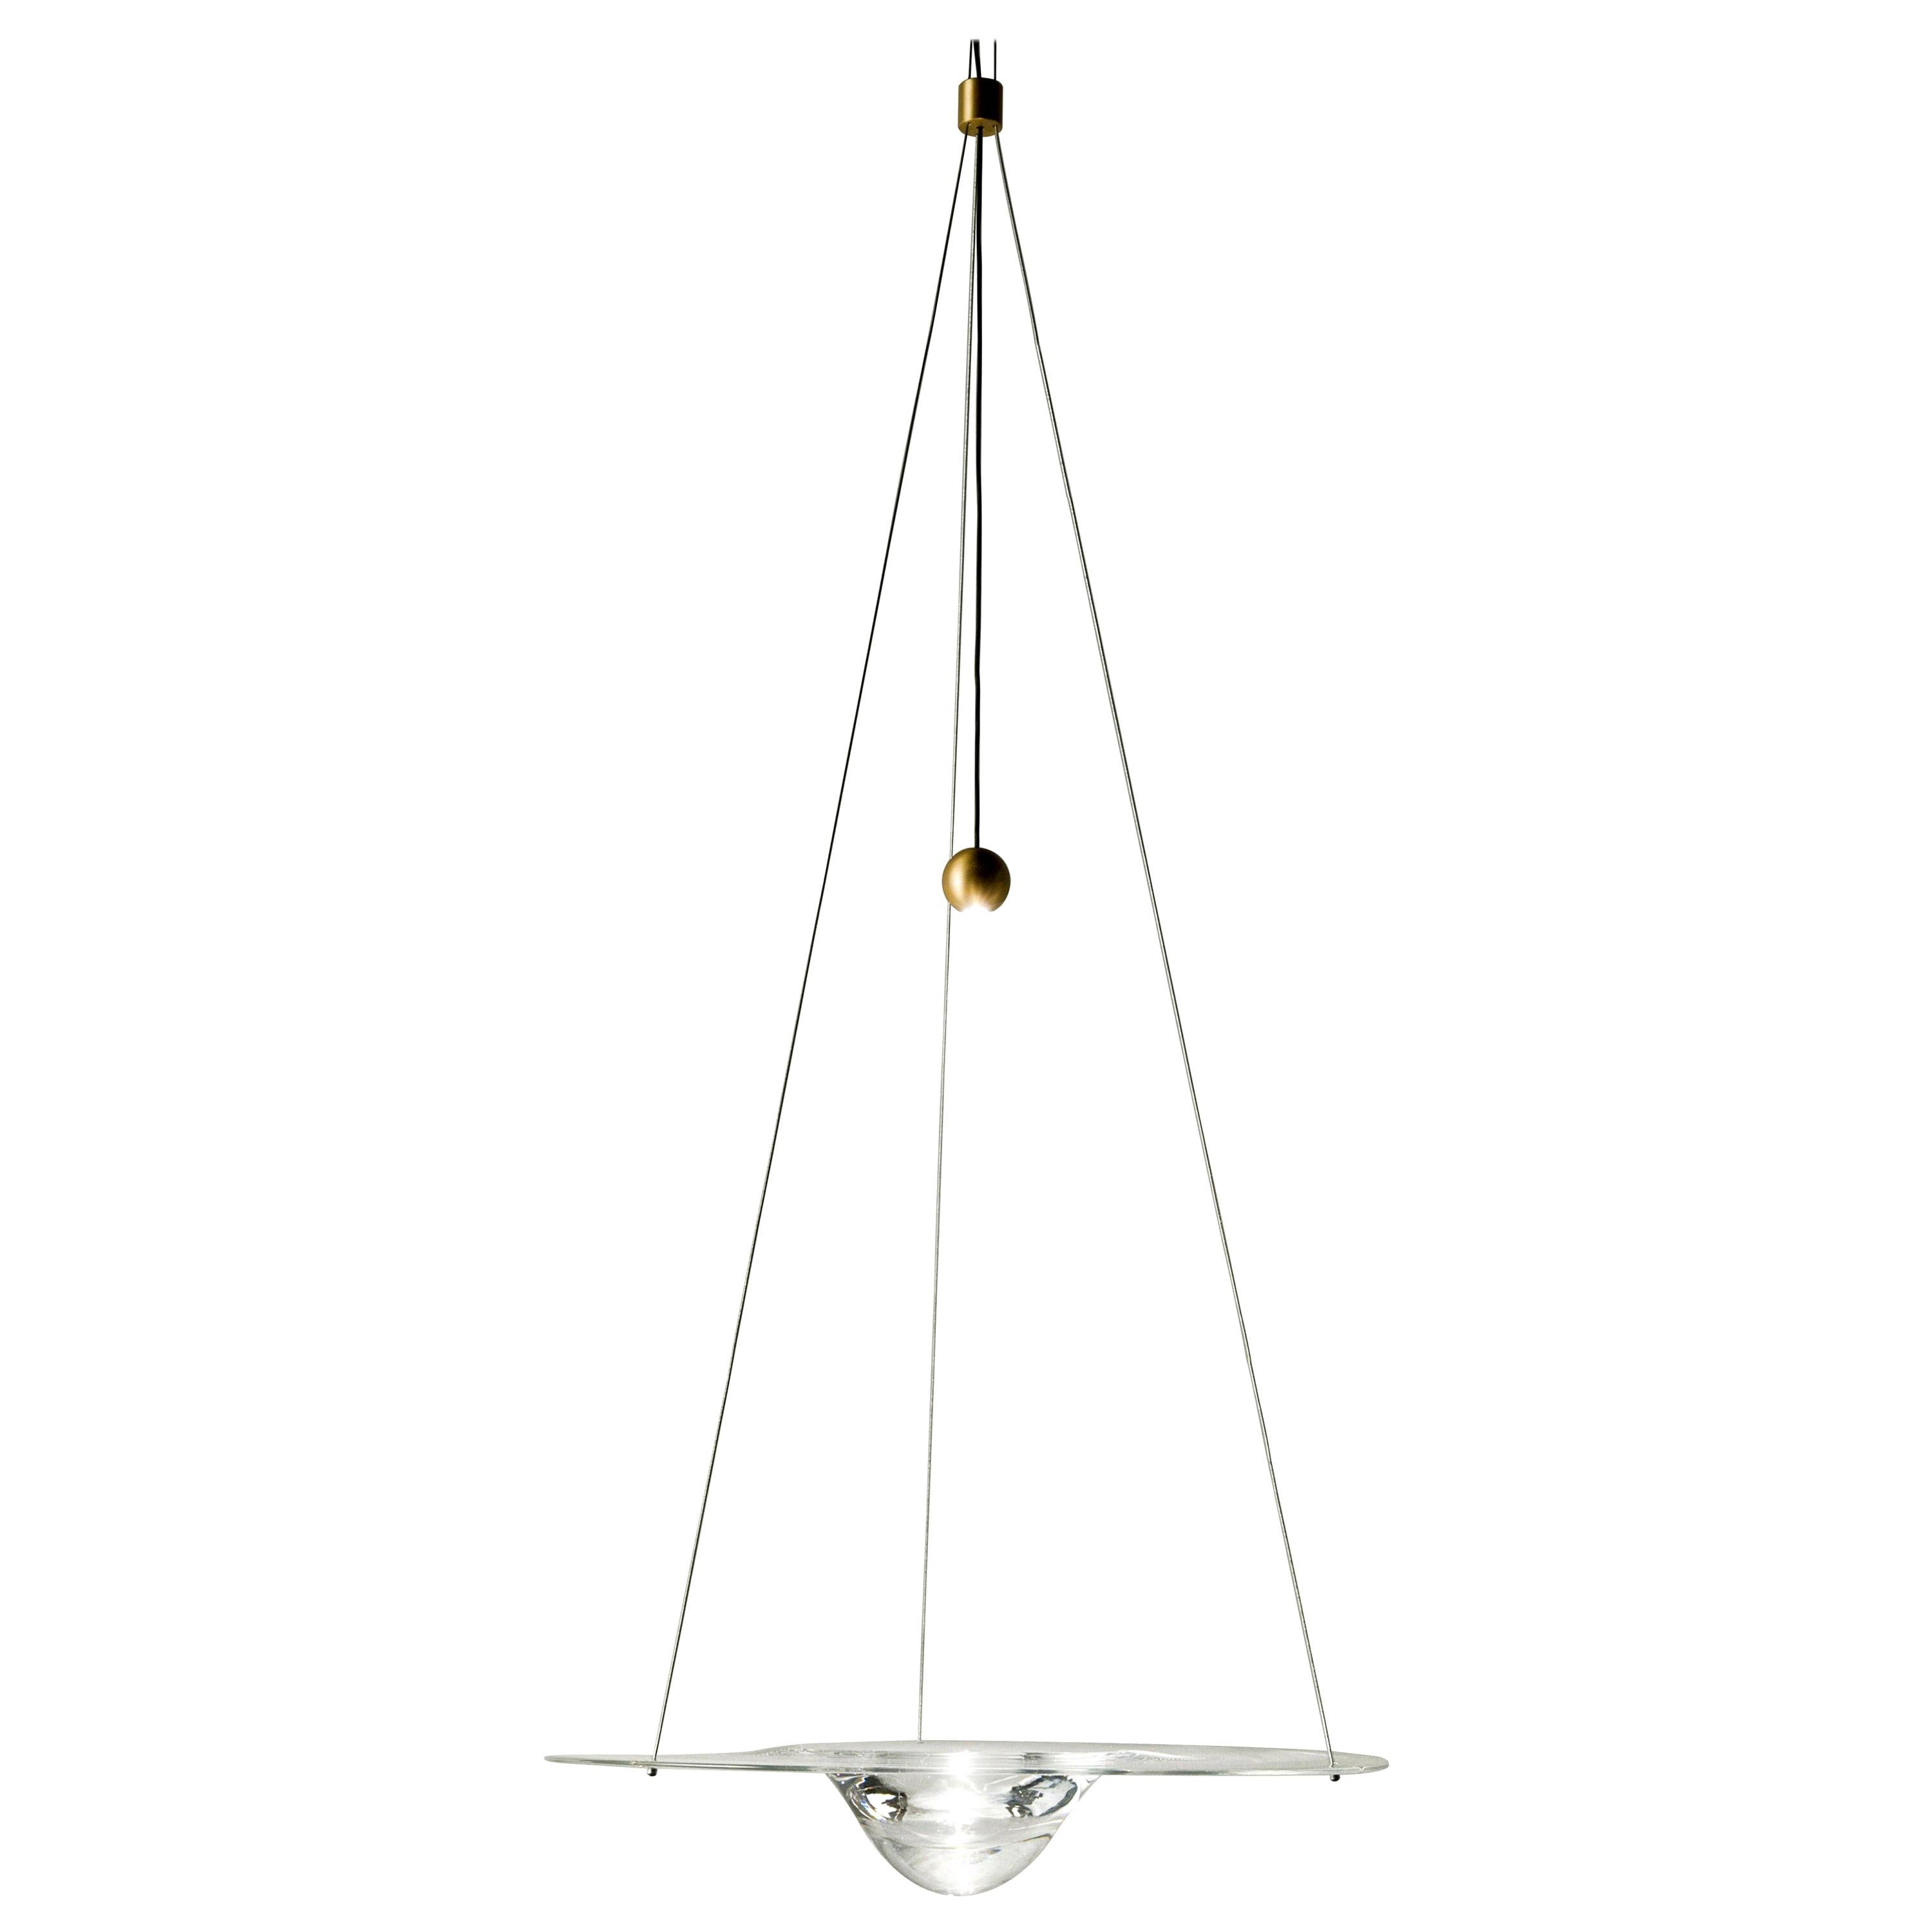 Momento MMT35 by Nao Tamura — Murano Blown Glass Pendant Lamp For Sale